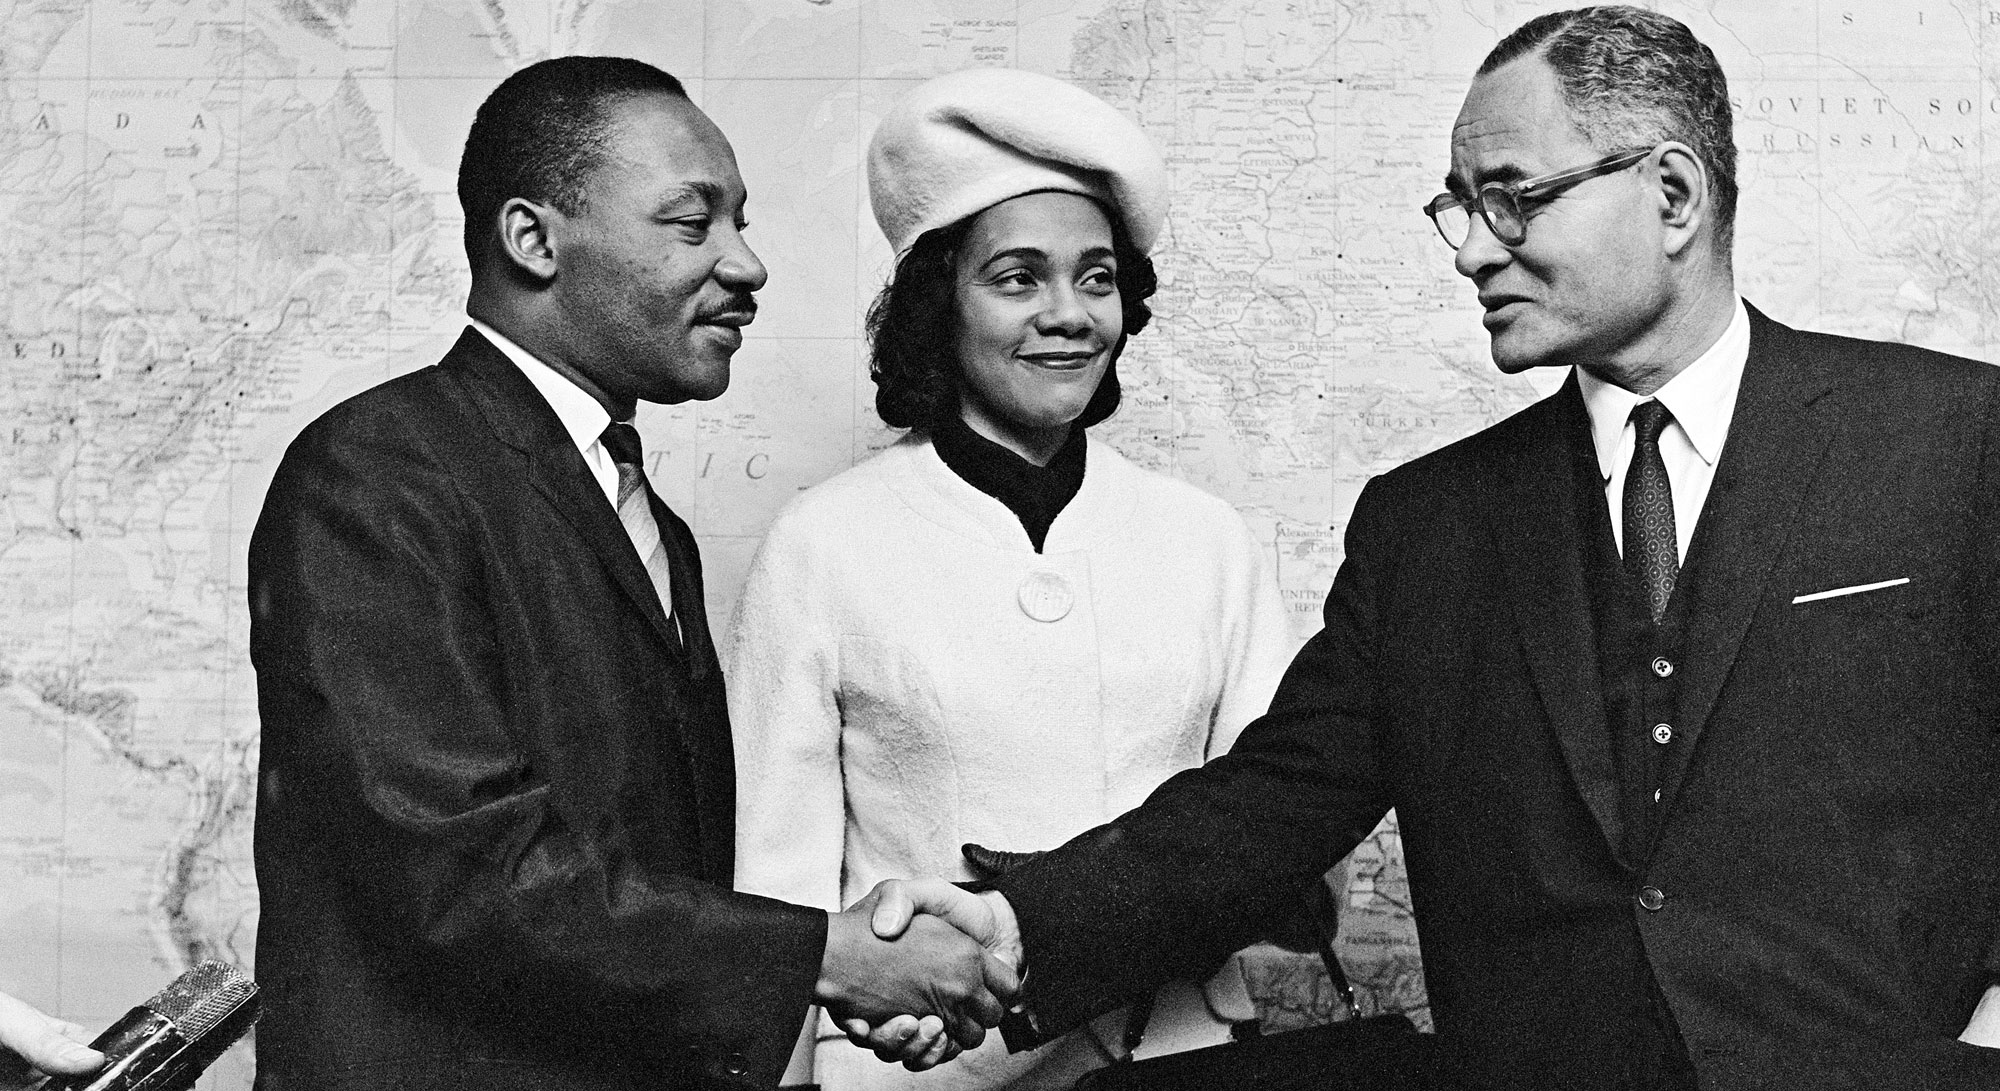 Ralph Bunche shakes hands with Martin Luther King, Jr. as he greets him and Coretta Scott King in 1964.